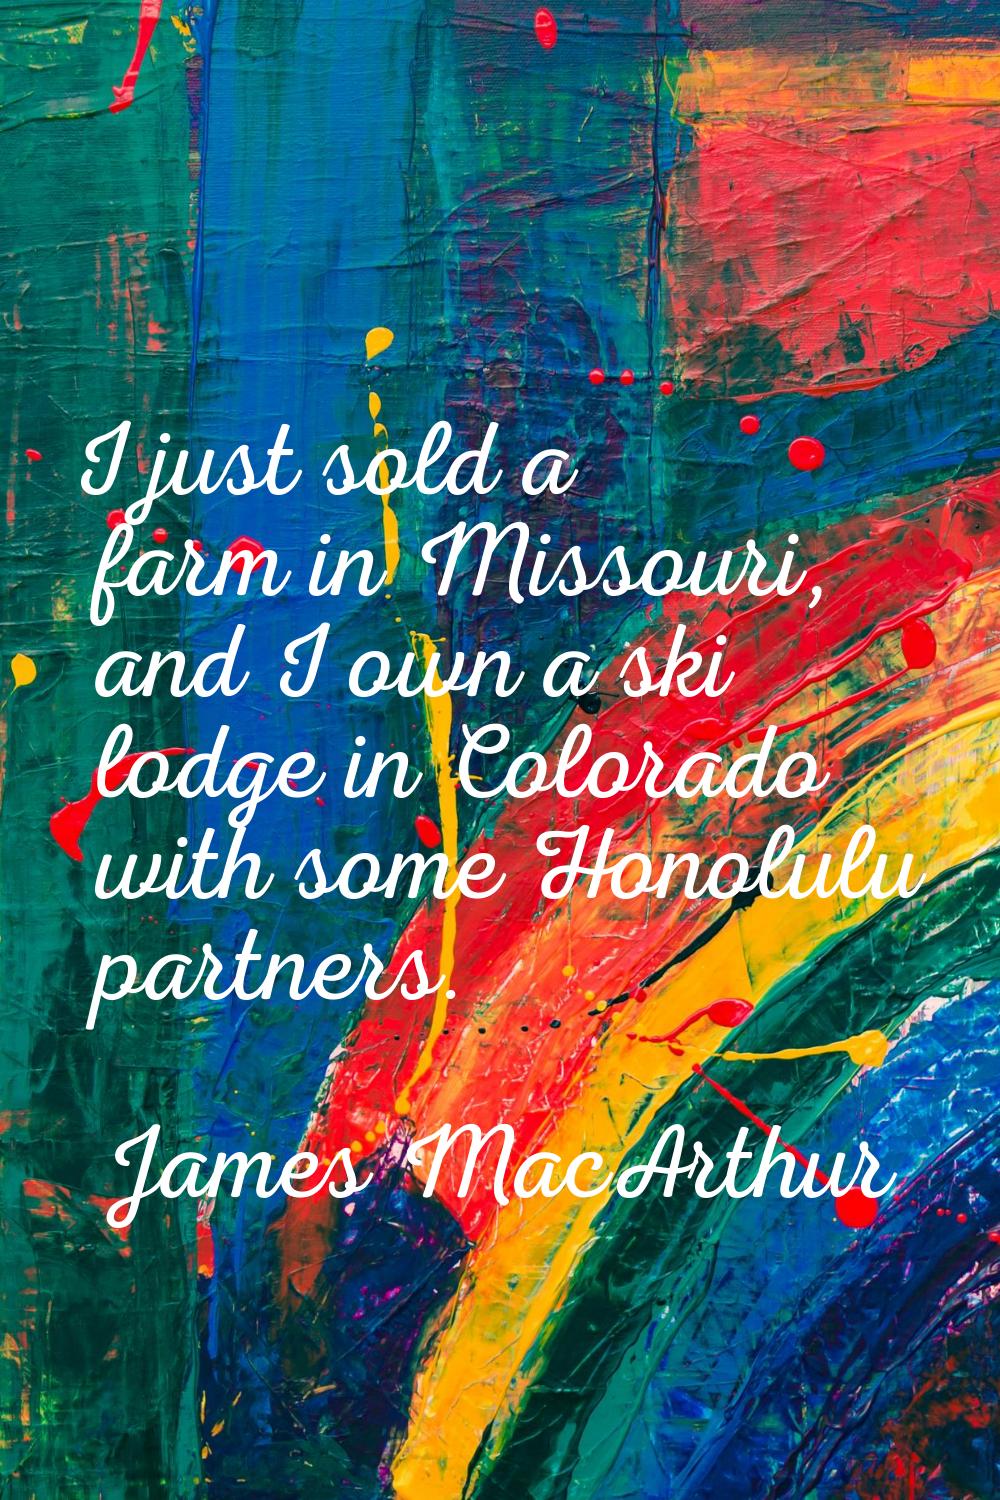 I just sold a farm in Missouri, and I own a ski lodge in Colorado with some Honolulu partners.